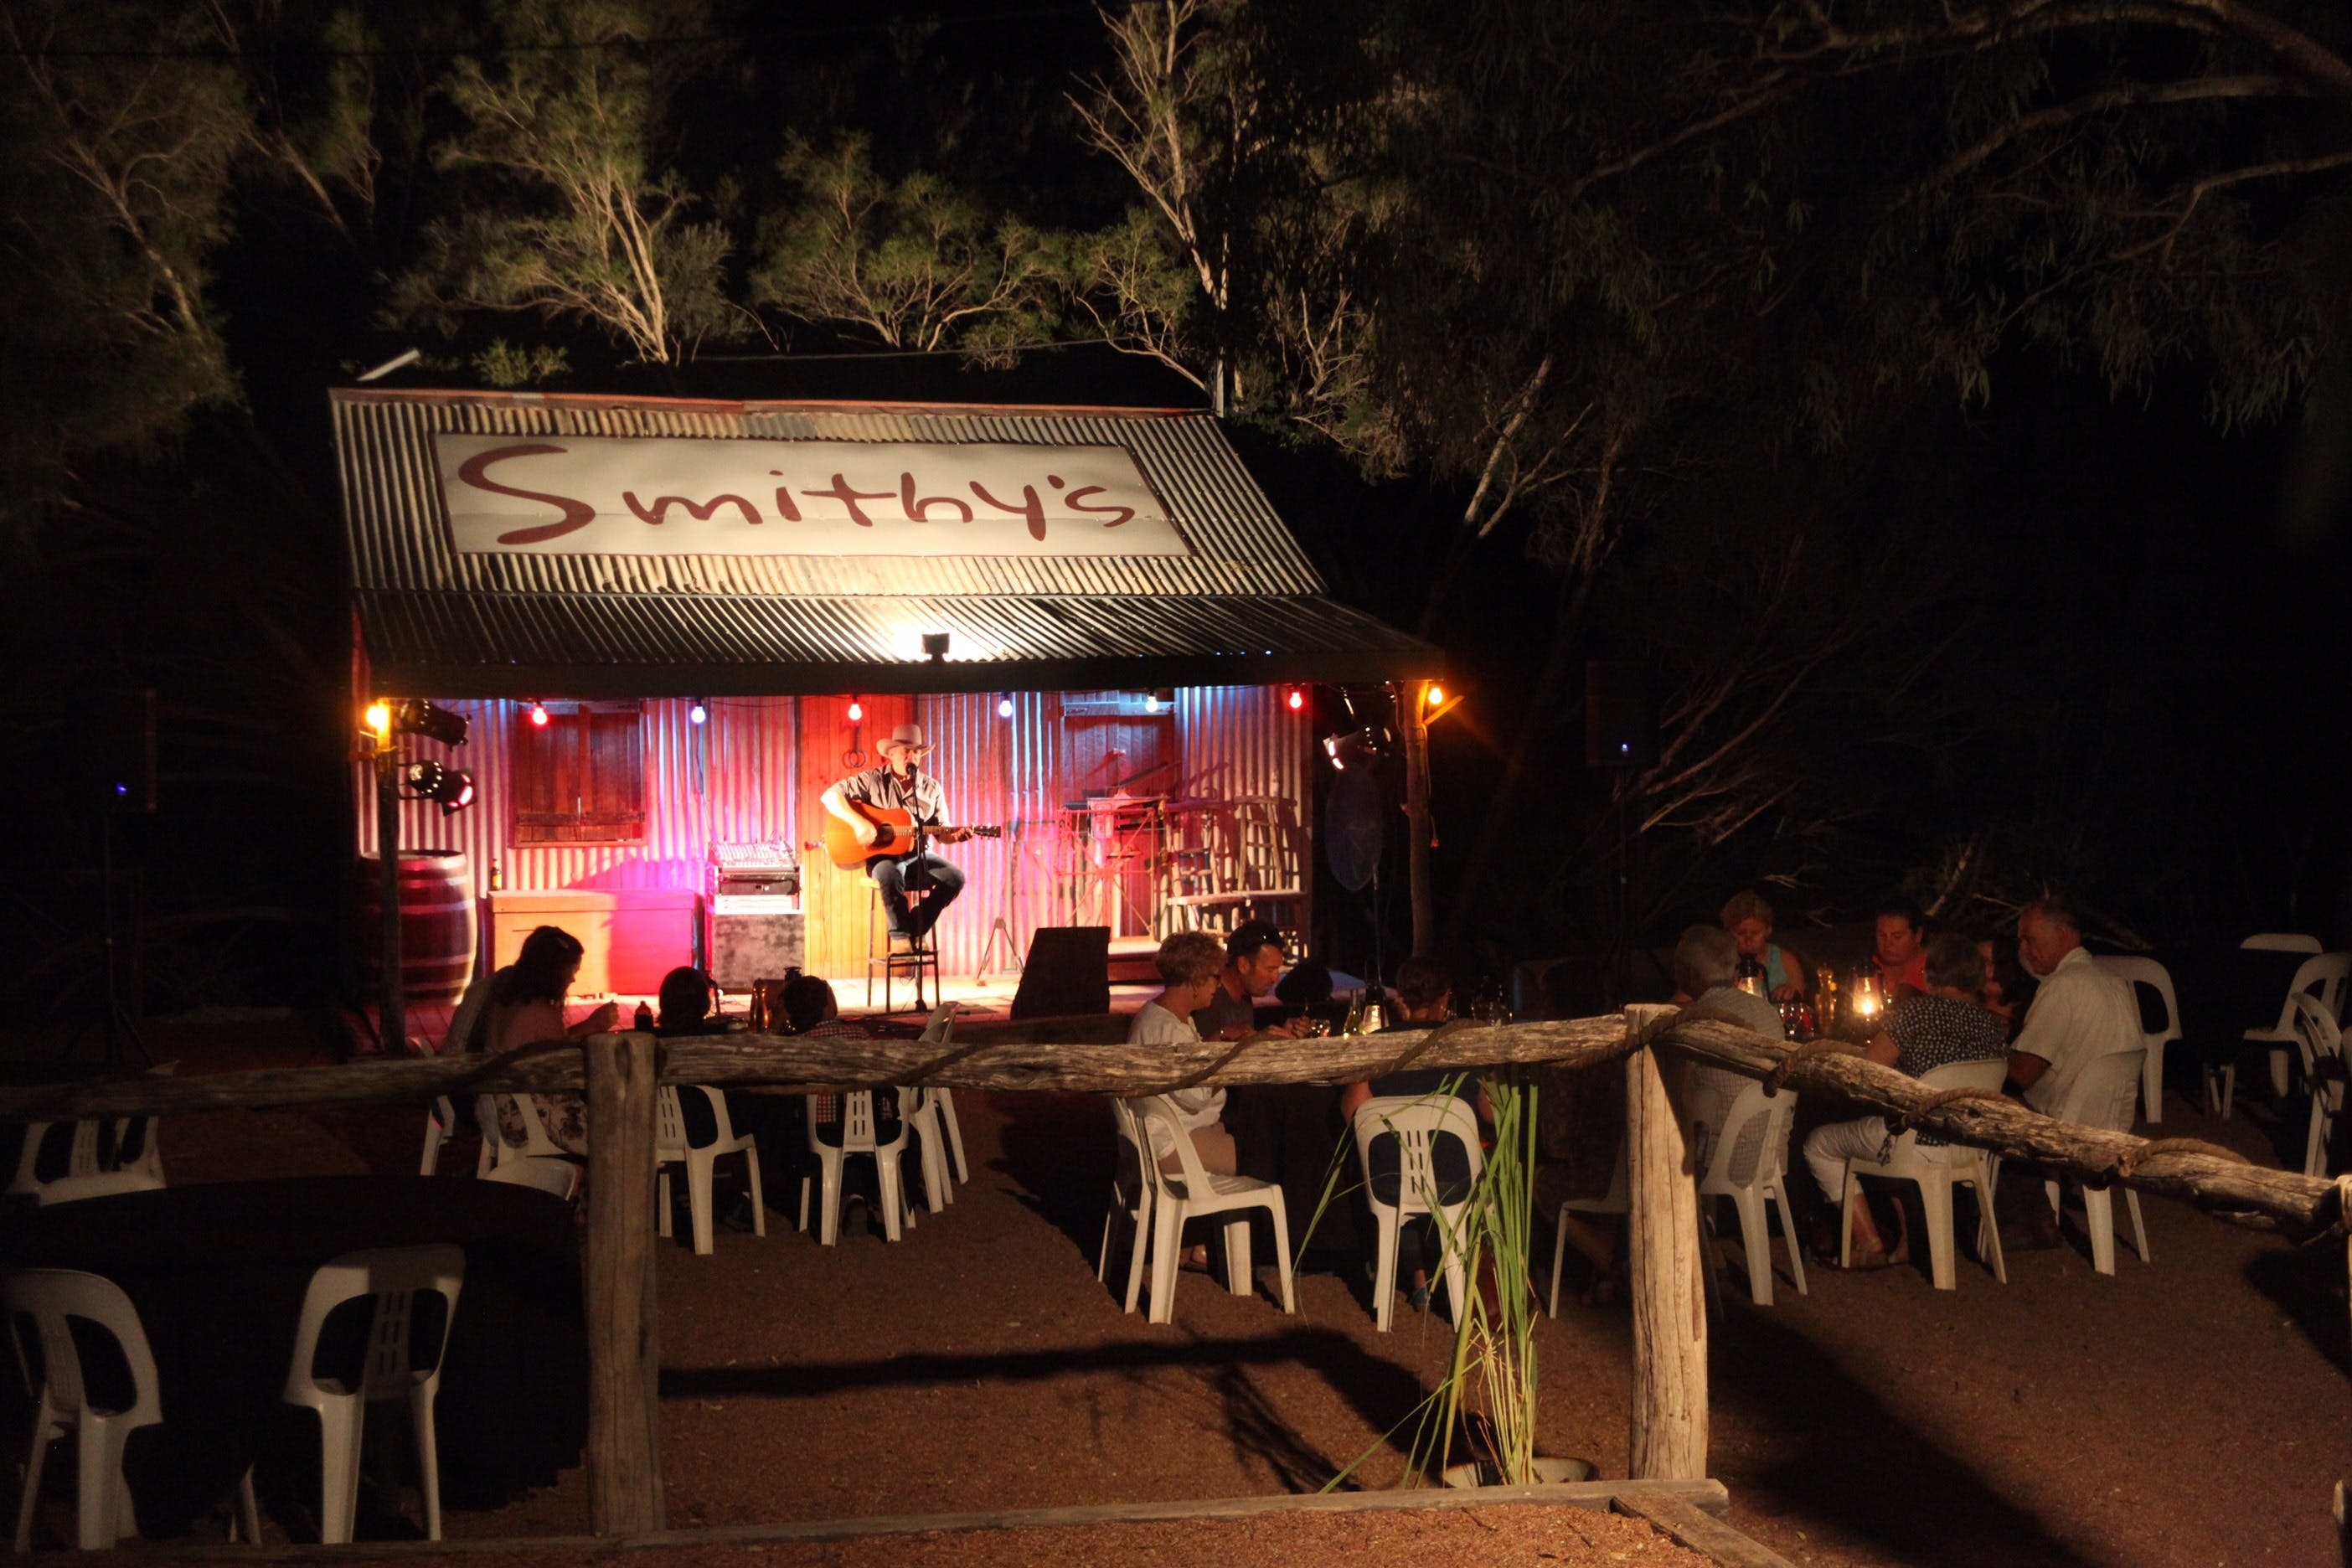 Smithy's Outback Dinner and Show - Tourism Cairns